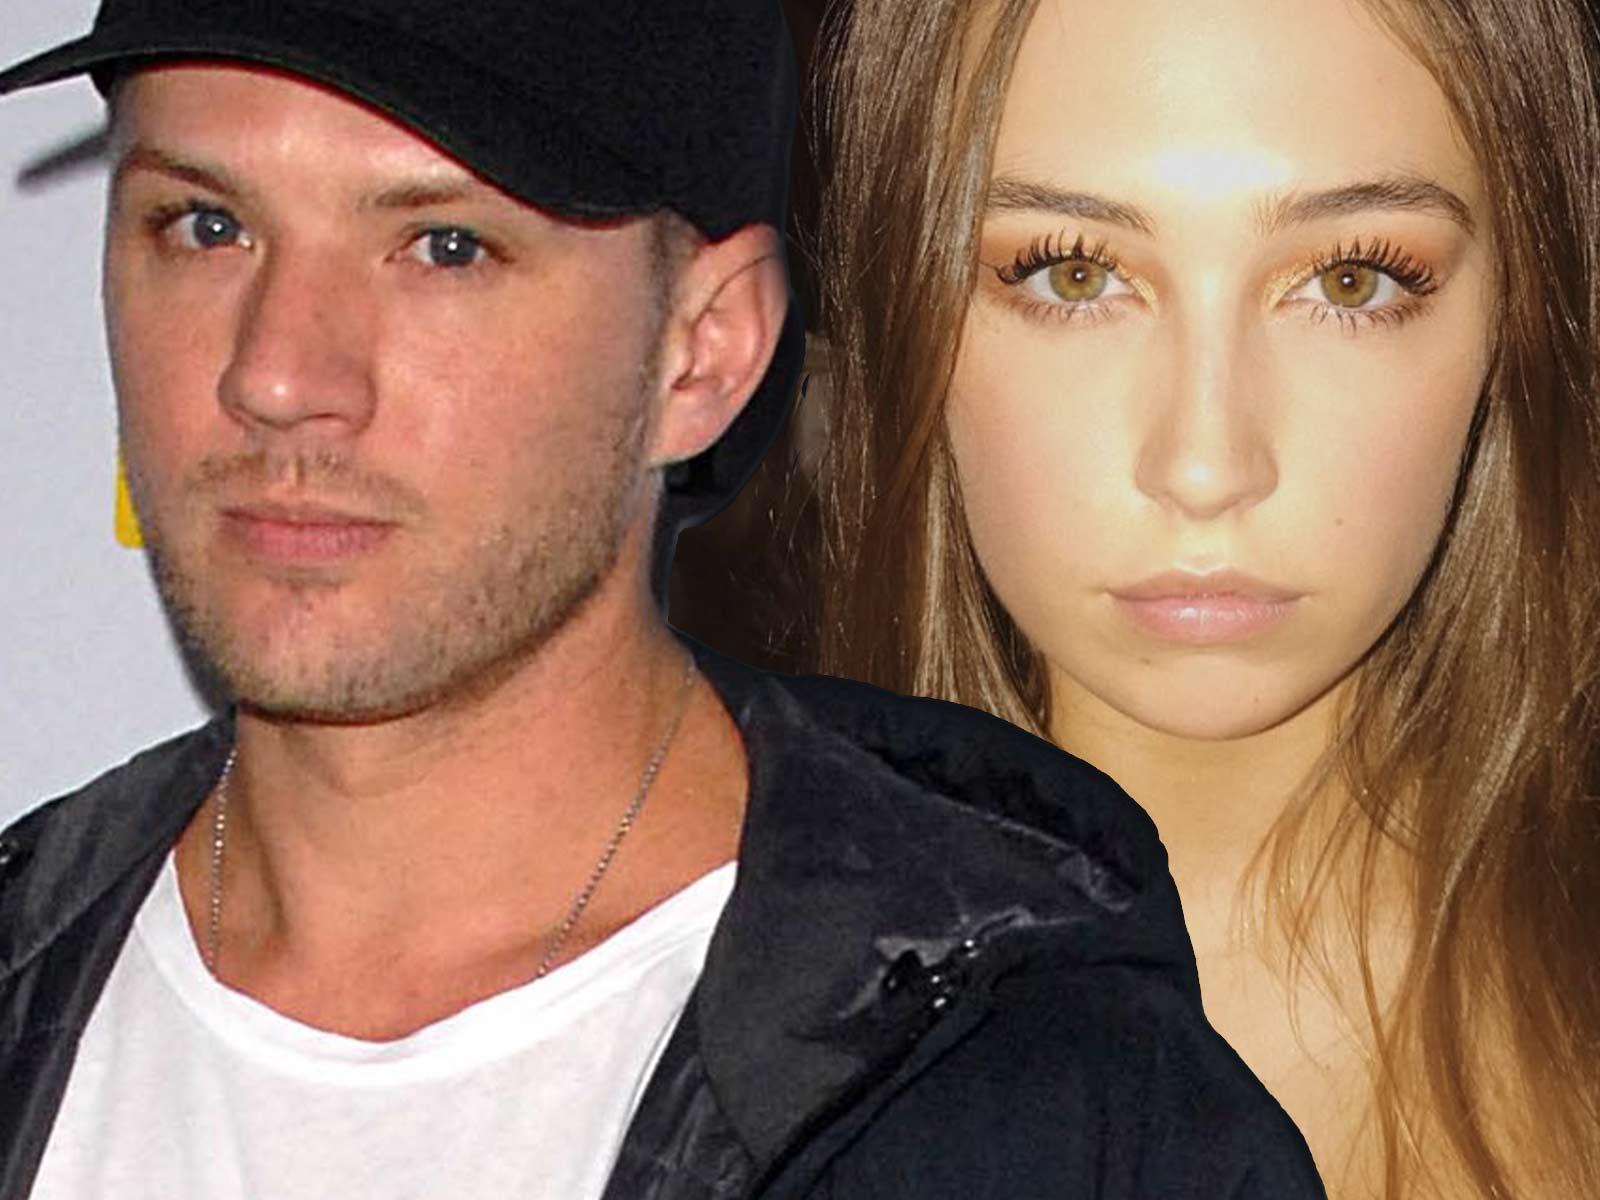 Ryan Phillippe Escapes Prosecution, But Not Out of The Woods